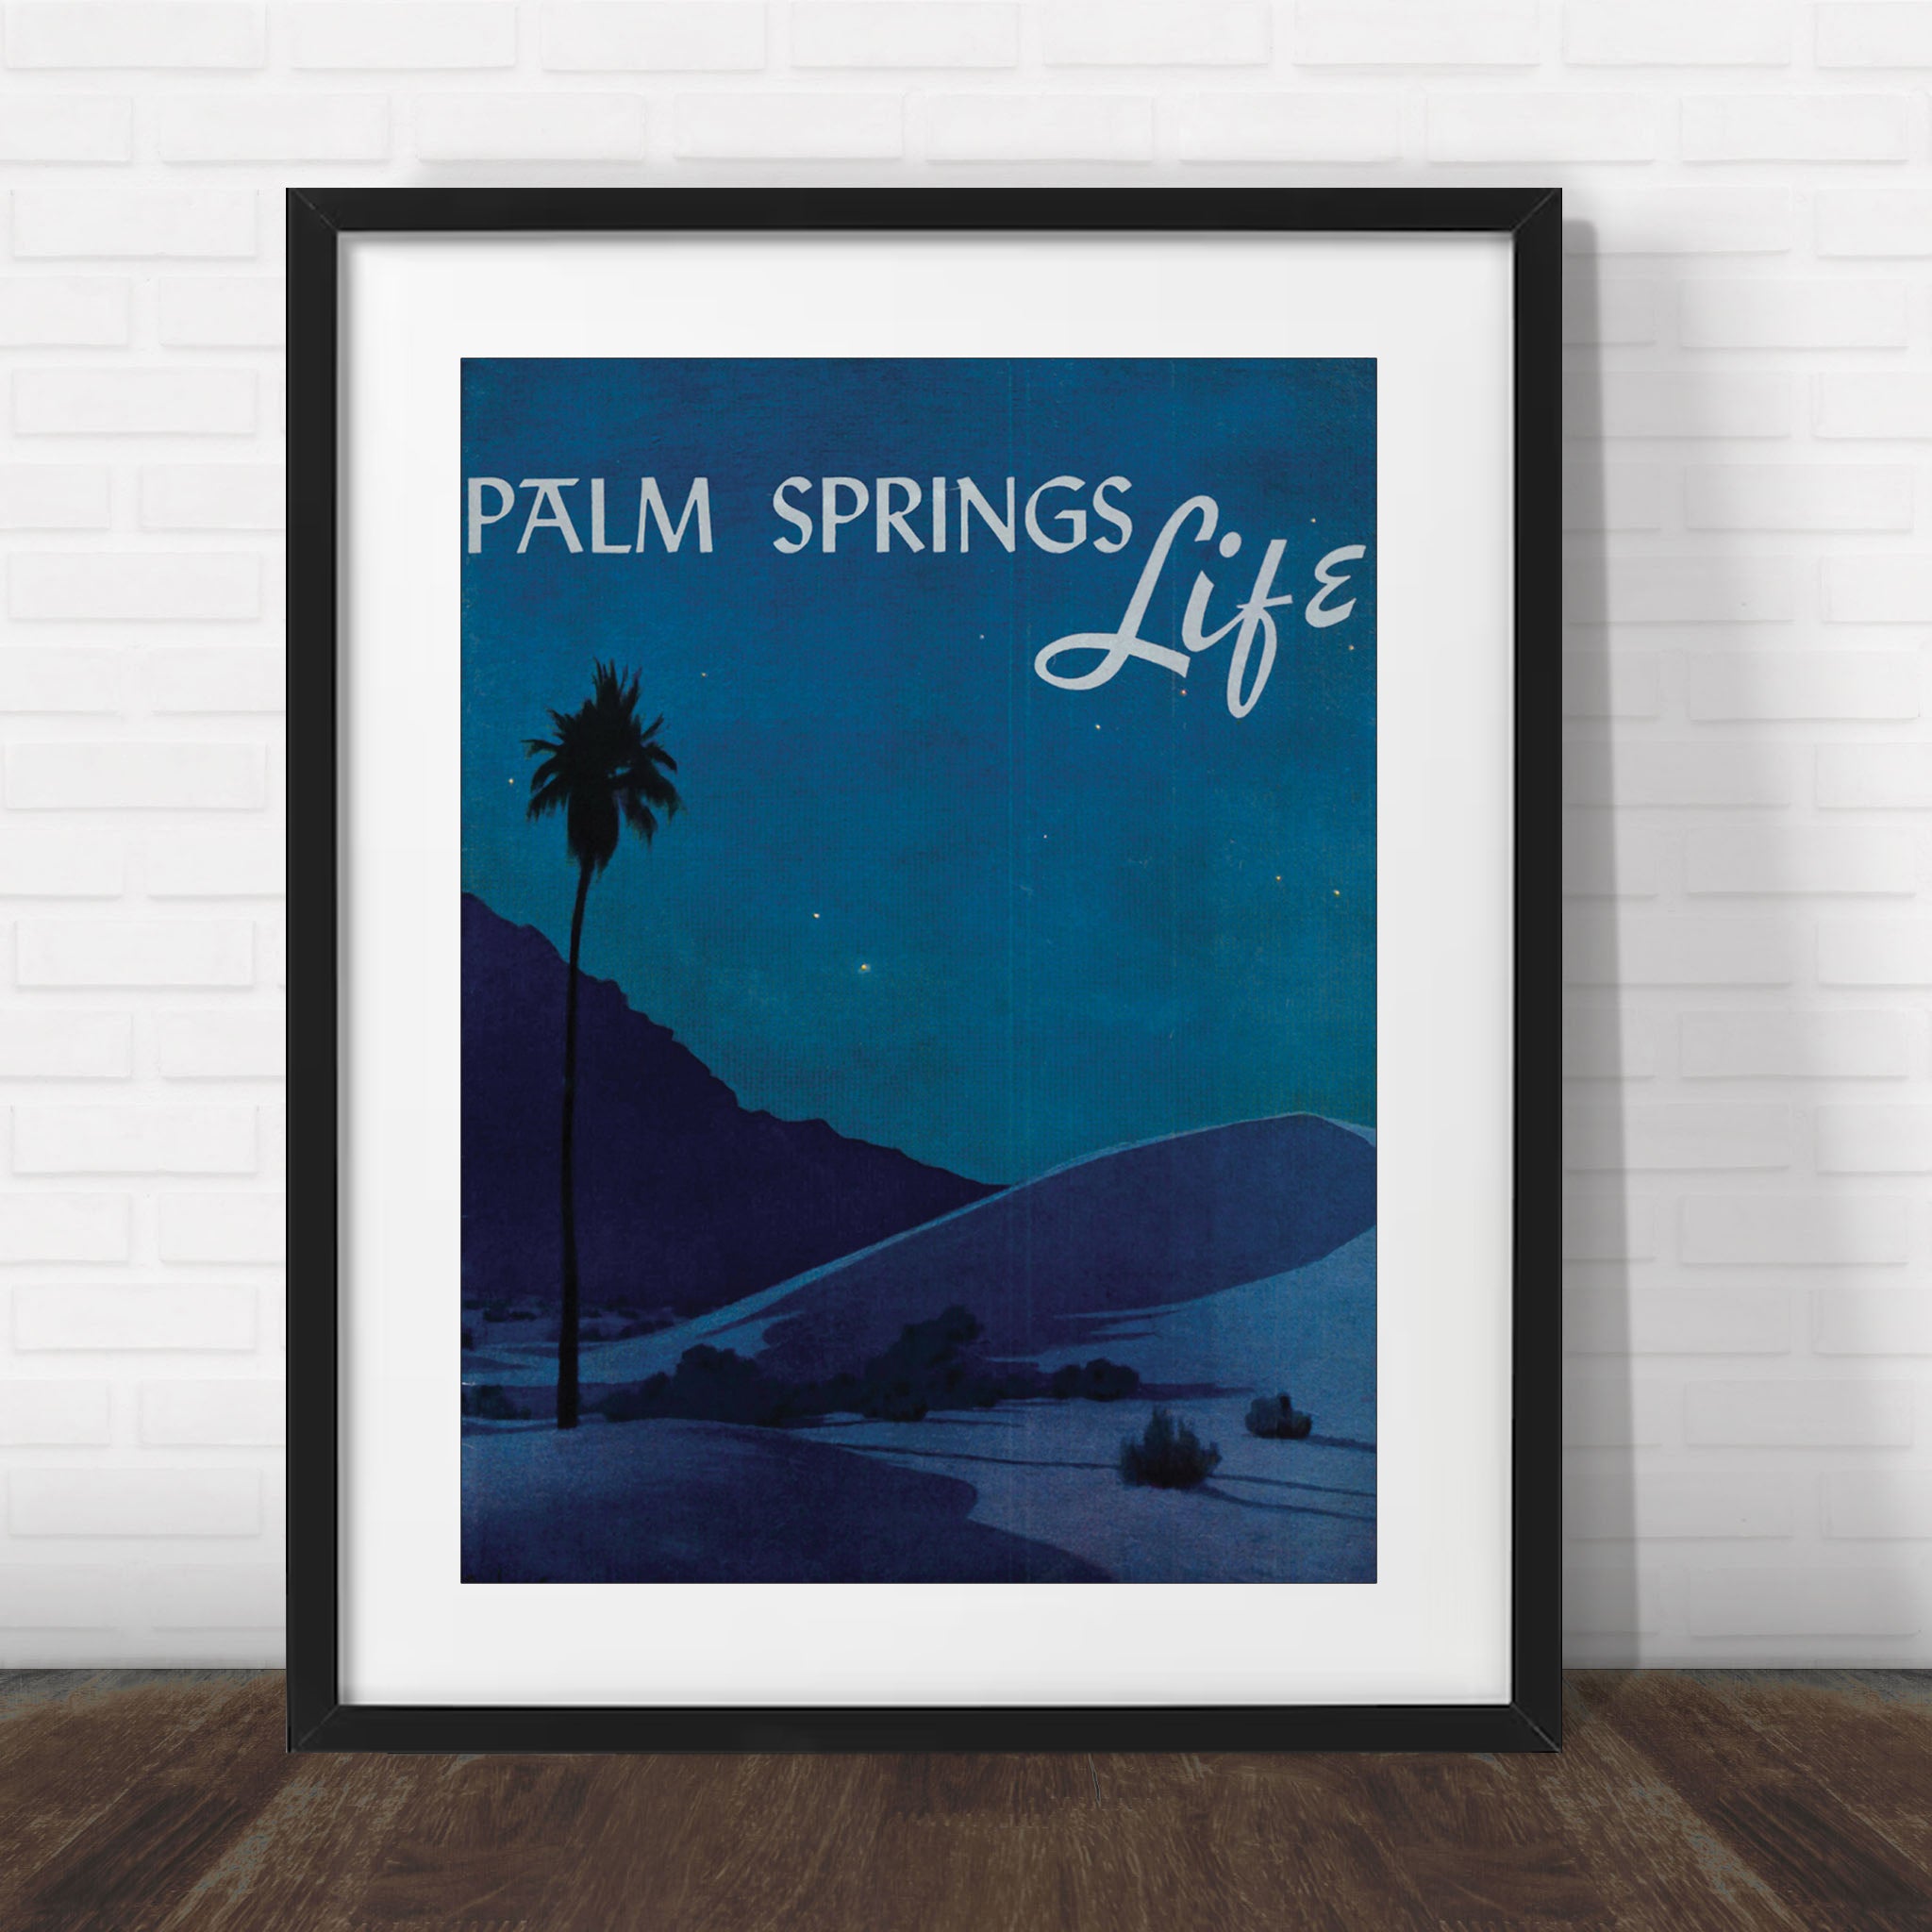 Palm Springs Life 1941 - Cover Poster